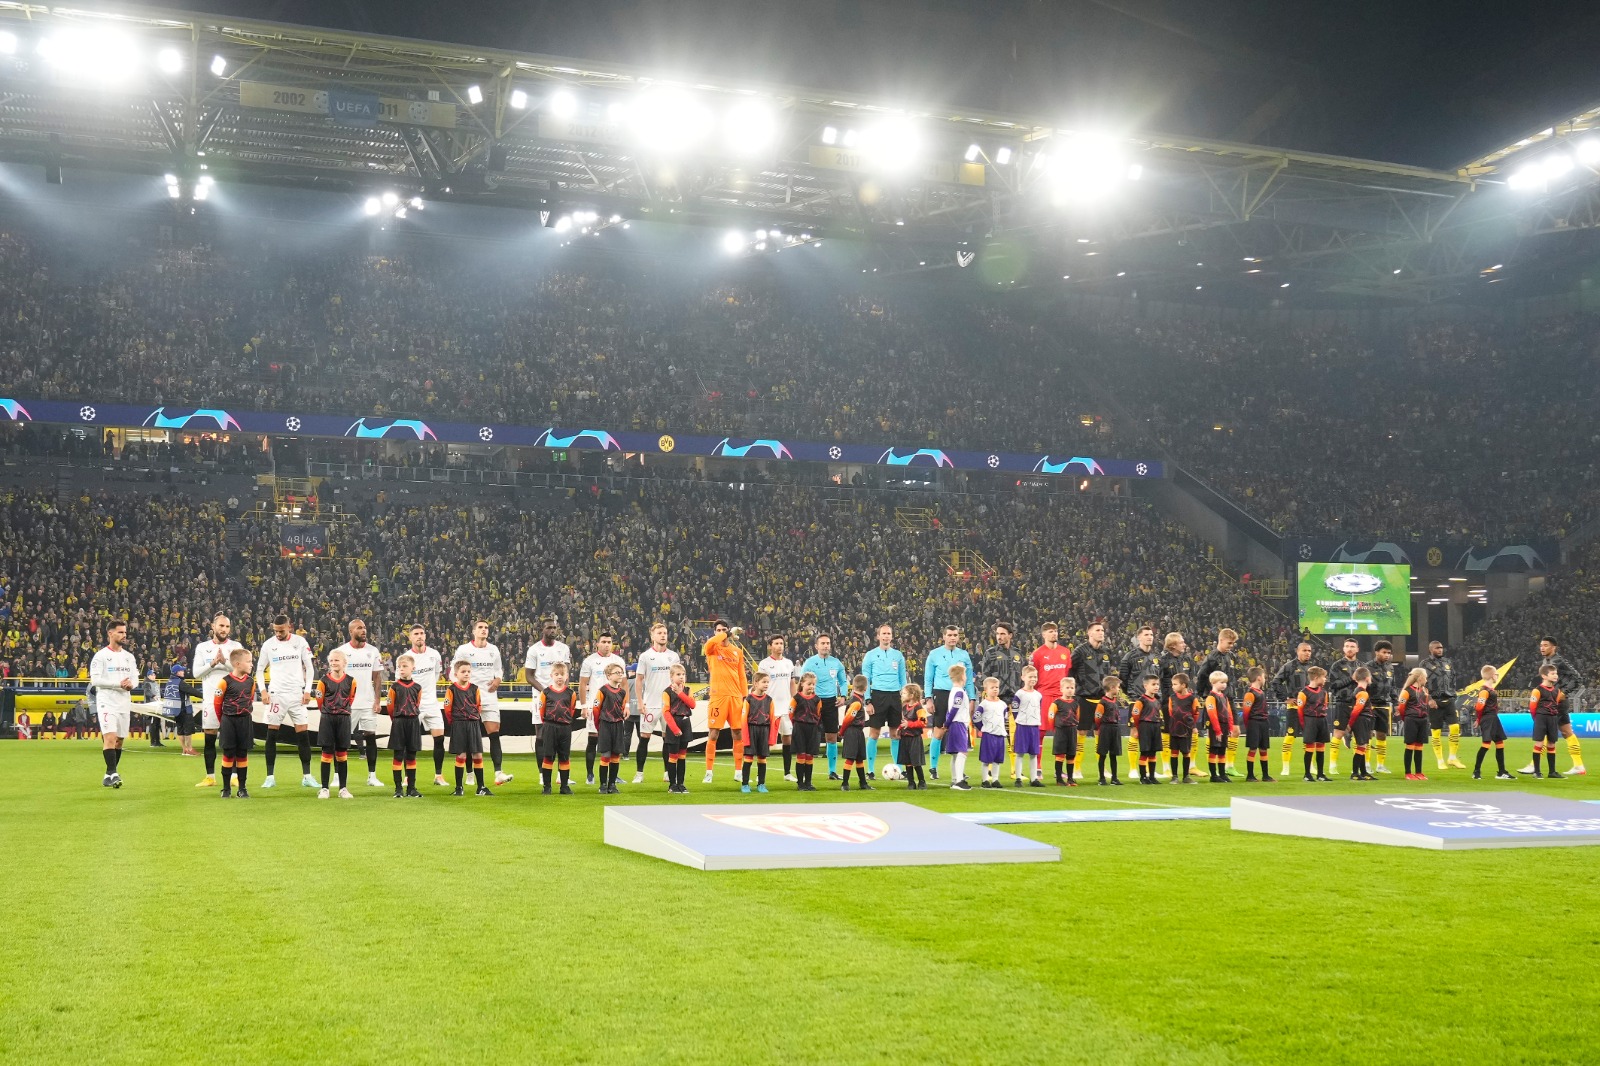 Dortmund and Sevilla step out on the pitch 